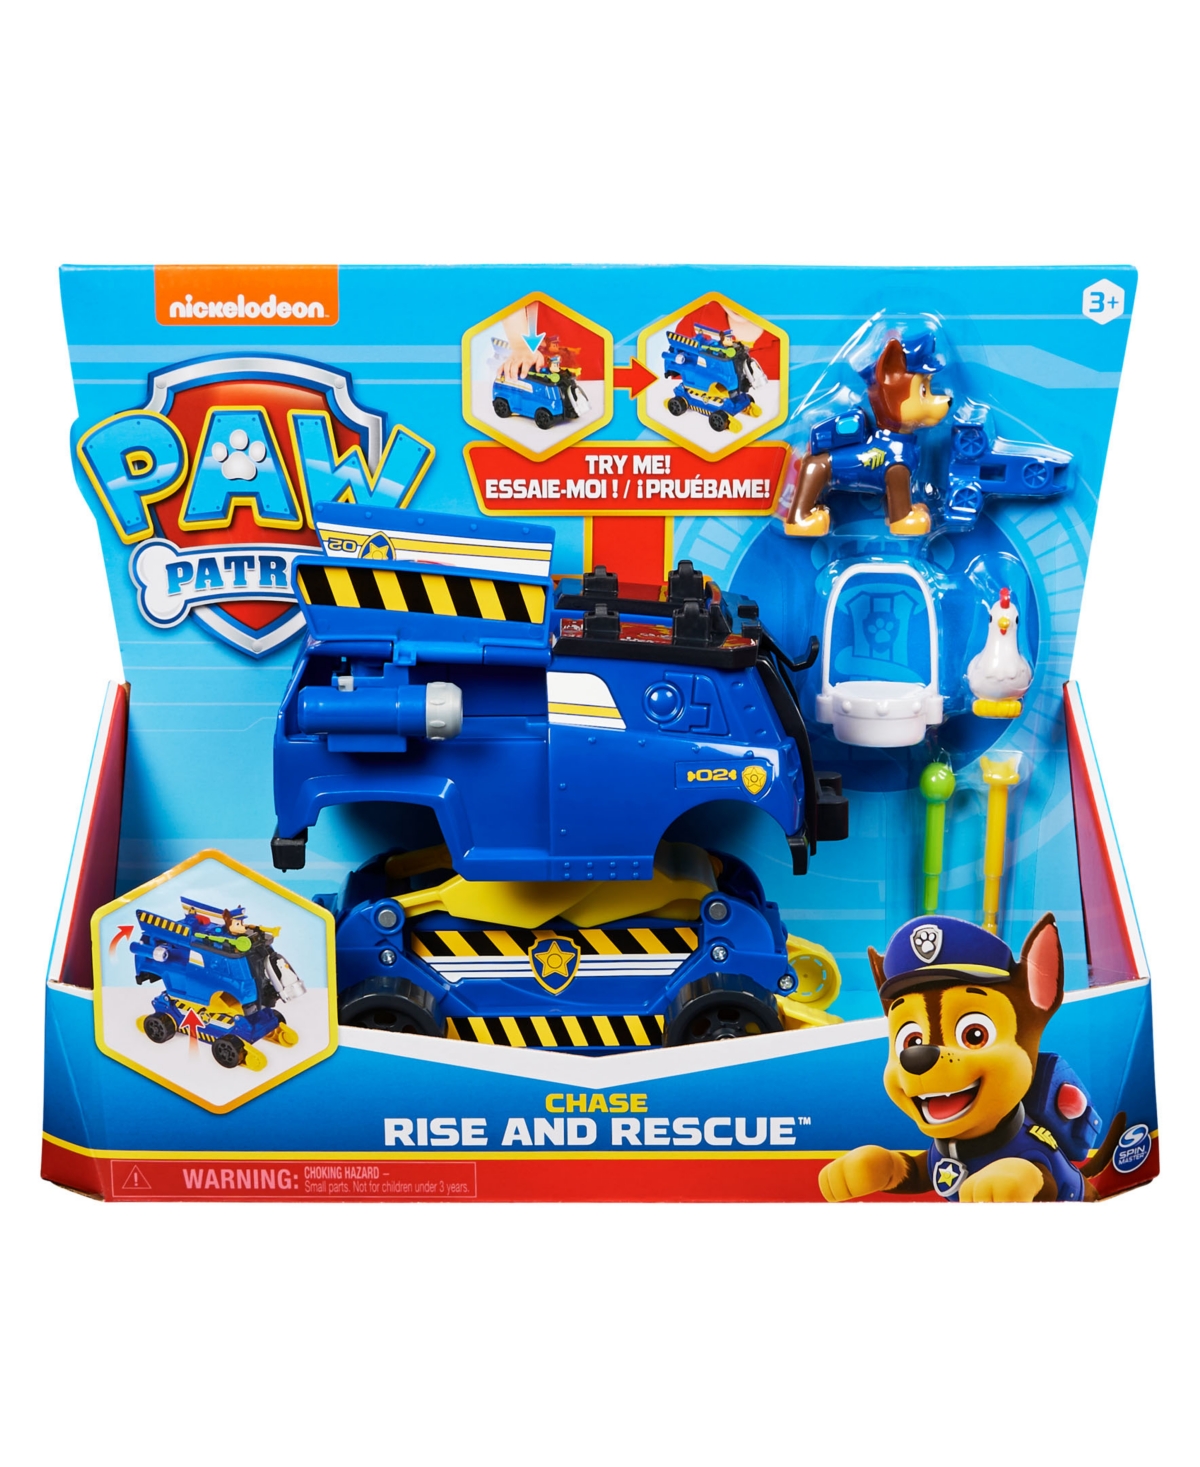 Paw Patrol Chase Rise And Rescue Changing Toy Car With Action Figures And Accessories In Multi-color